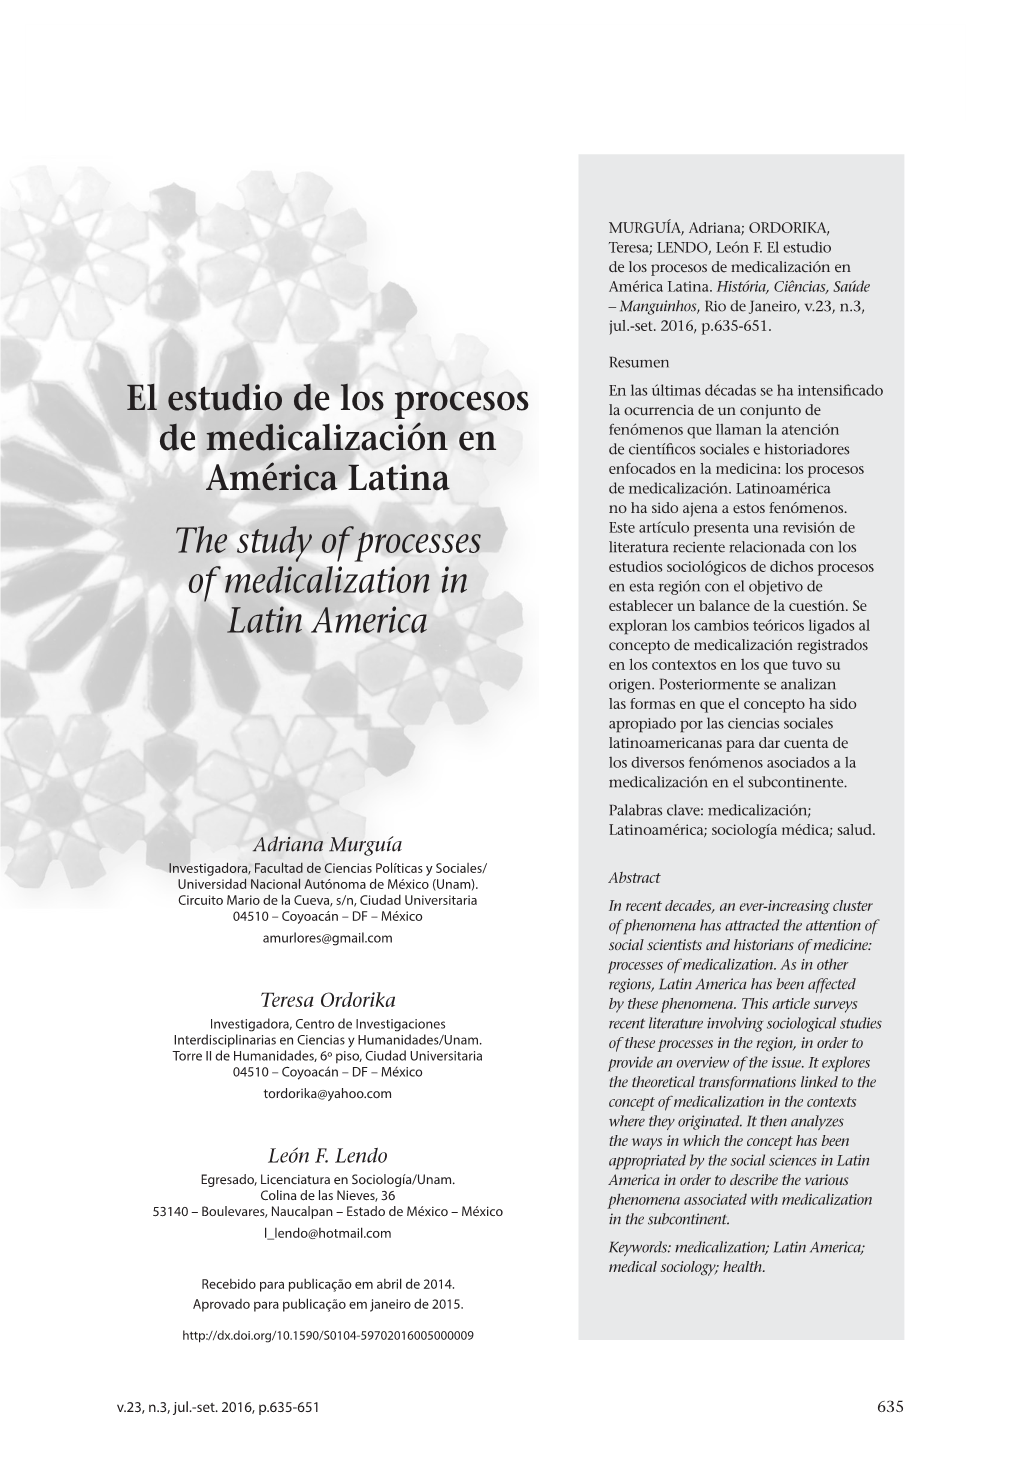 The Study of Processes of Medicalization in Latin America